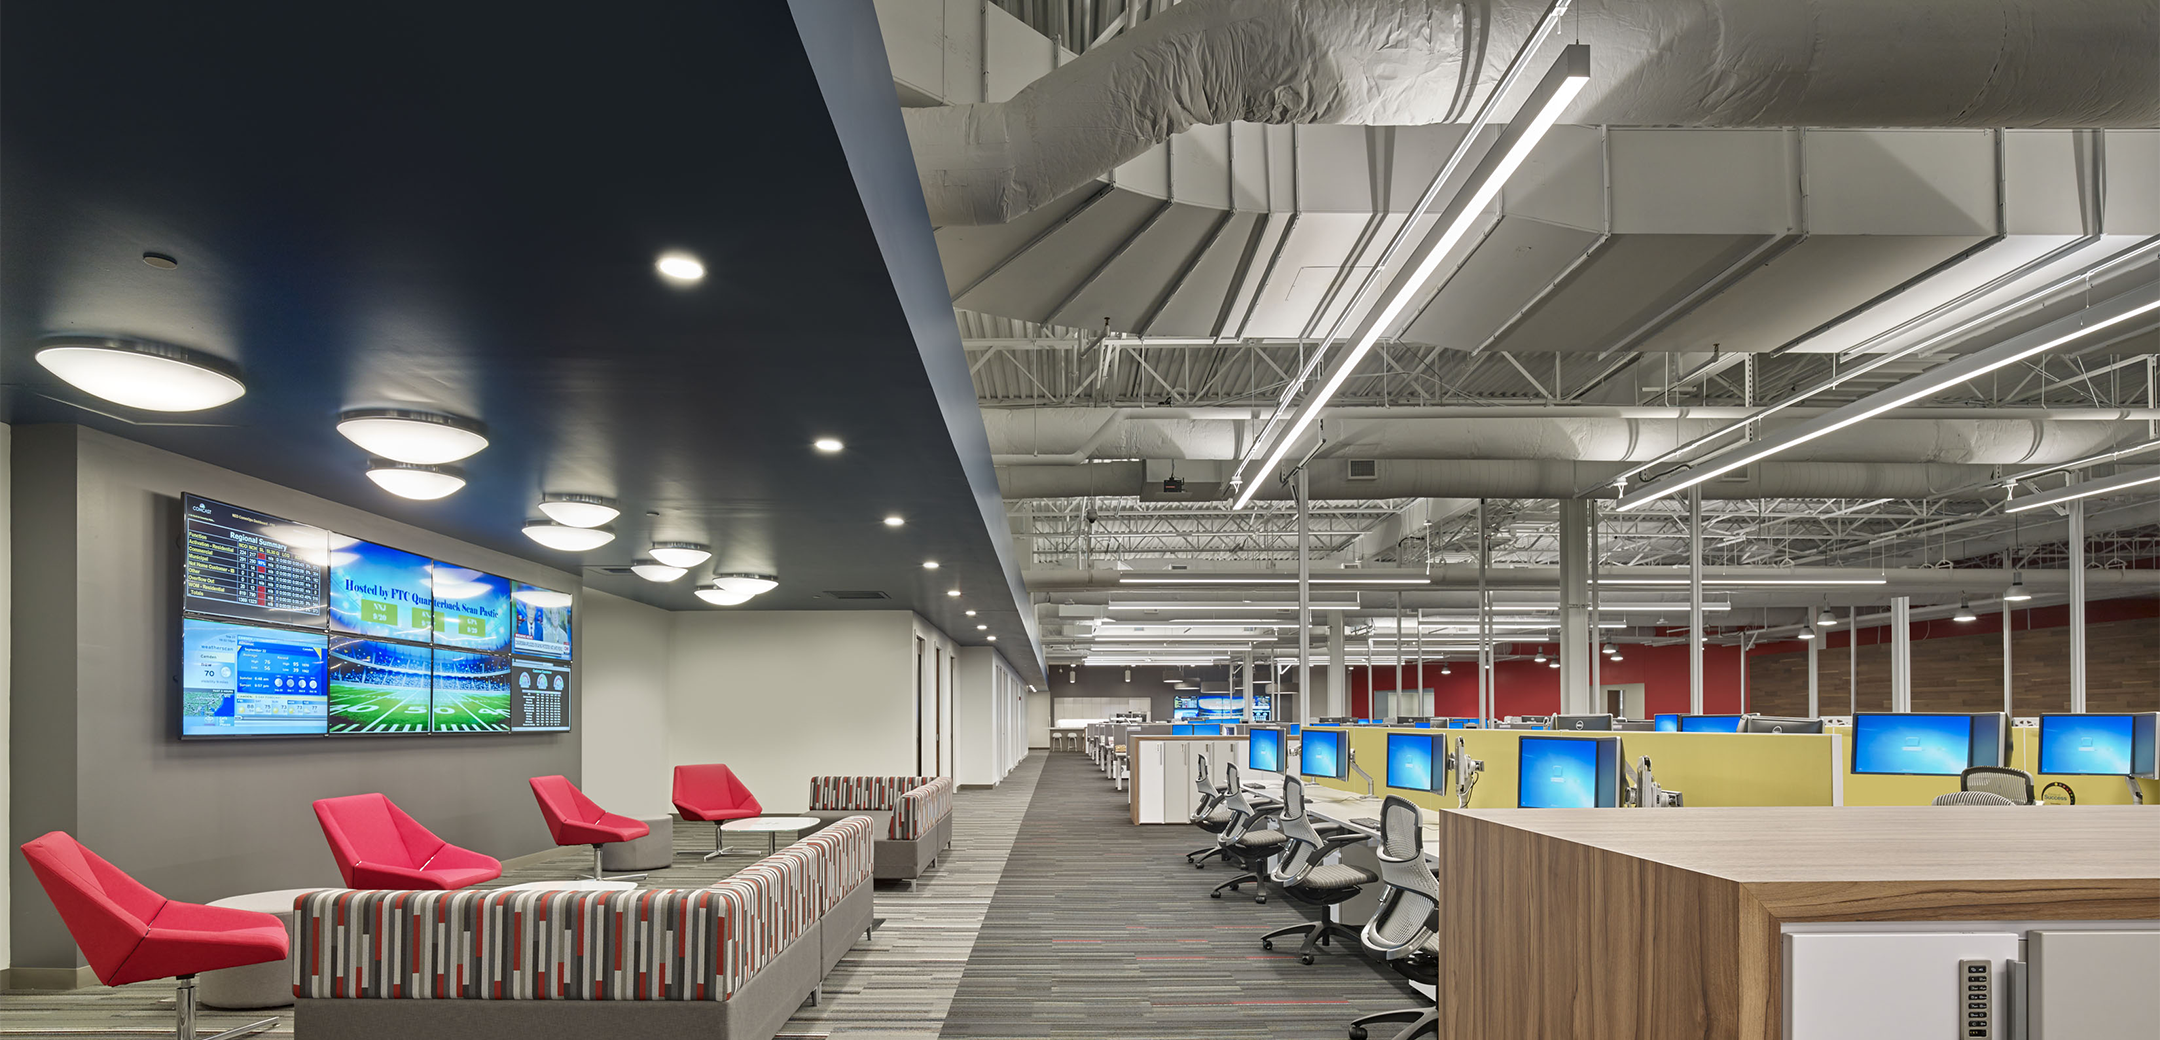 The call center area of the Network Operations center featuring open exposed ceilings with open cubicles on the right and a sitting area with tvs on the left.